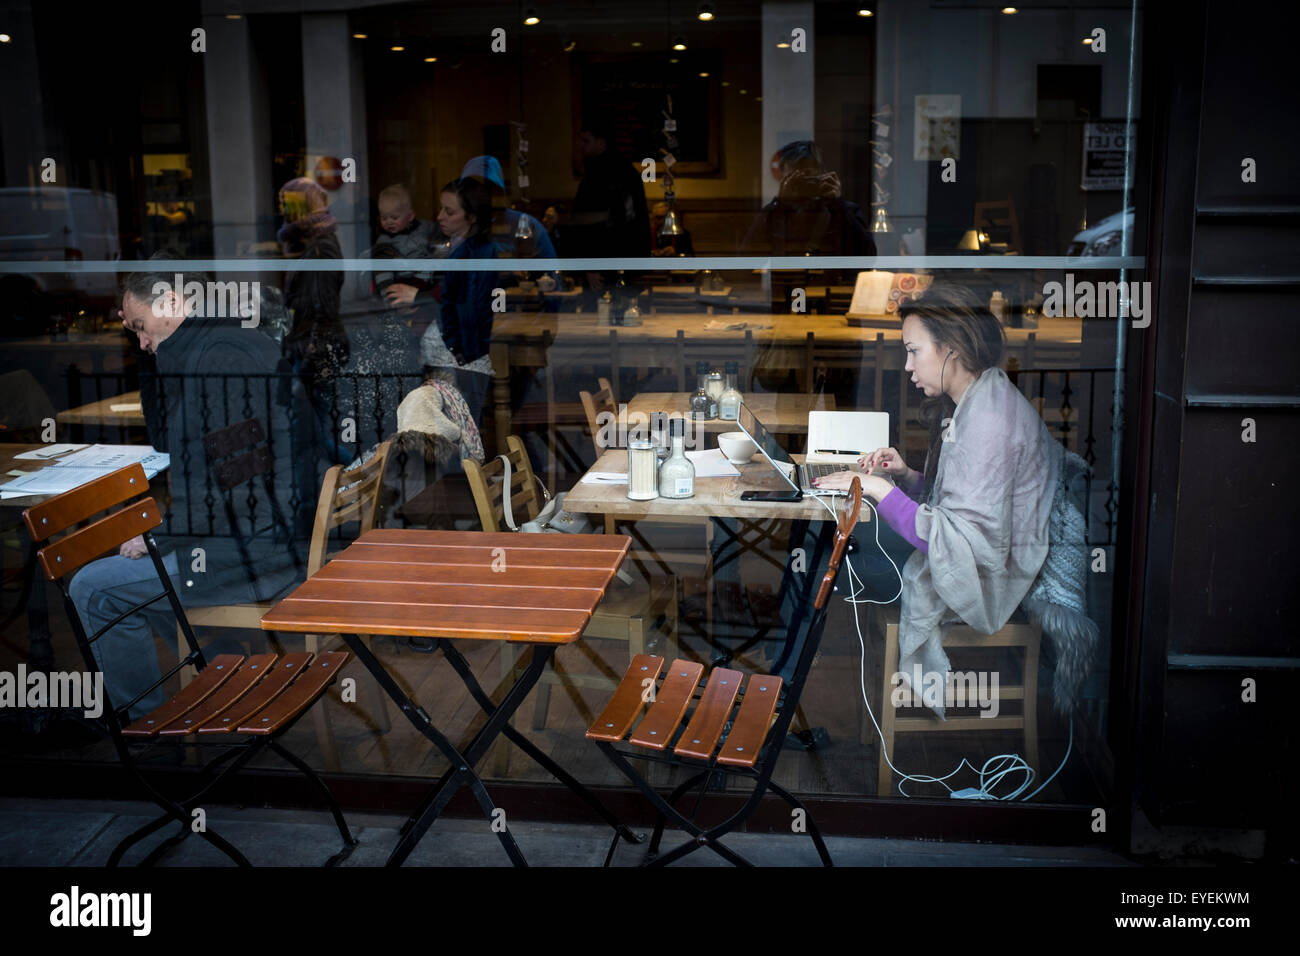 Young female using computer in a cafe, London, UK Stock Photo